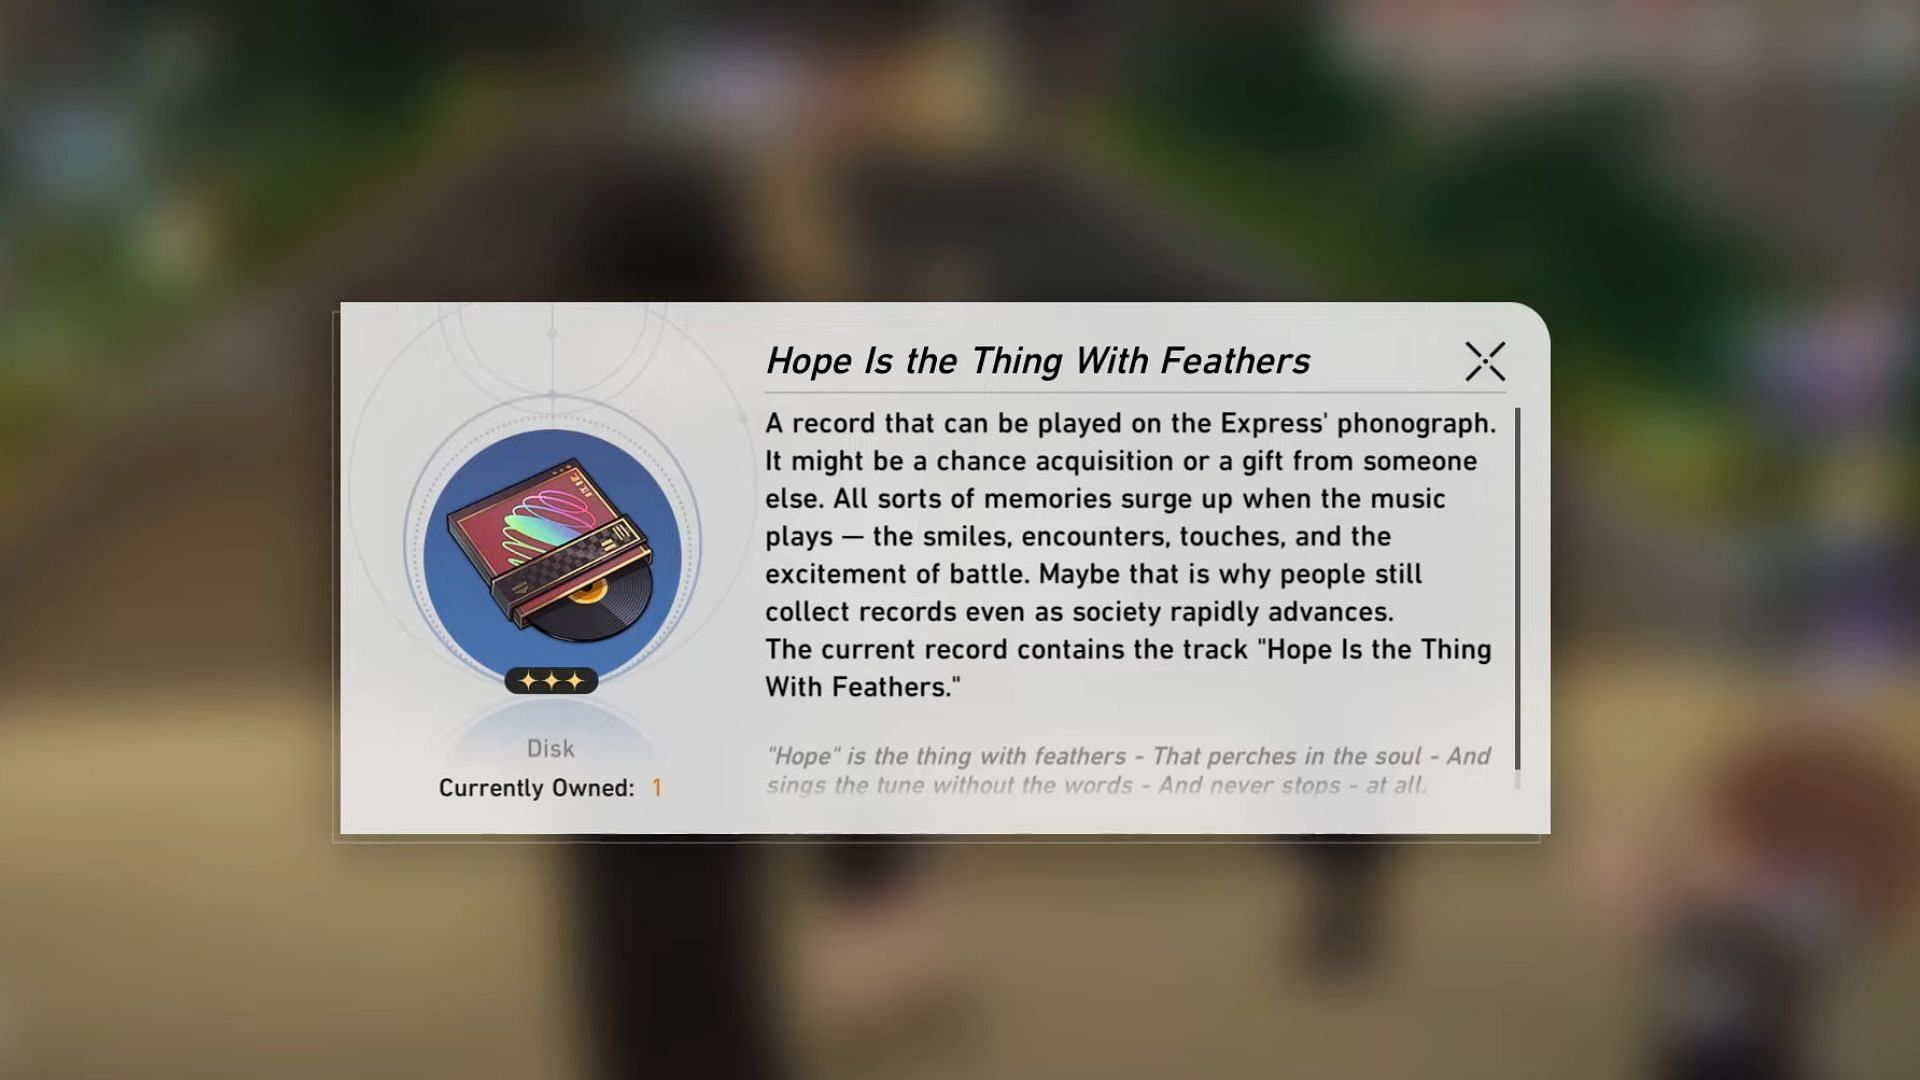 Image showing the Hope is the thing with feathers record